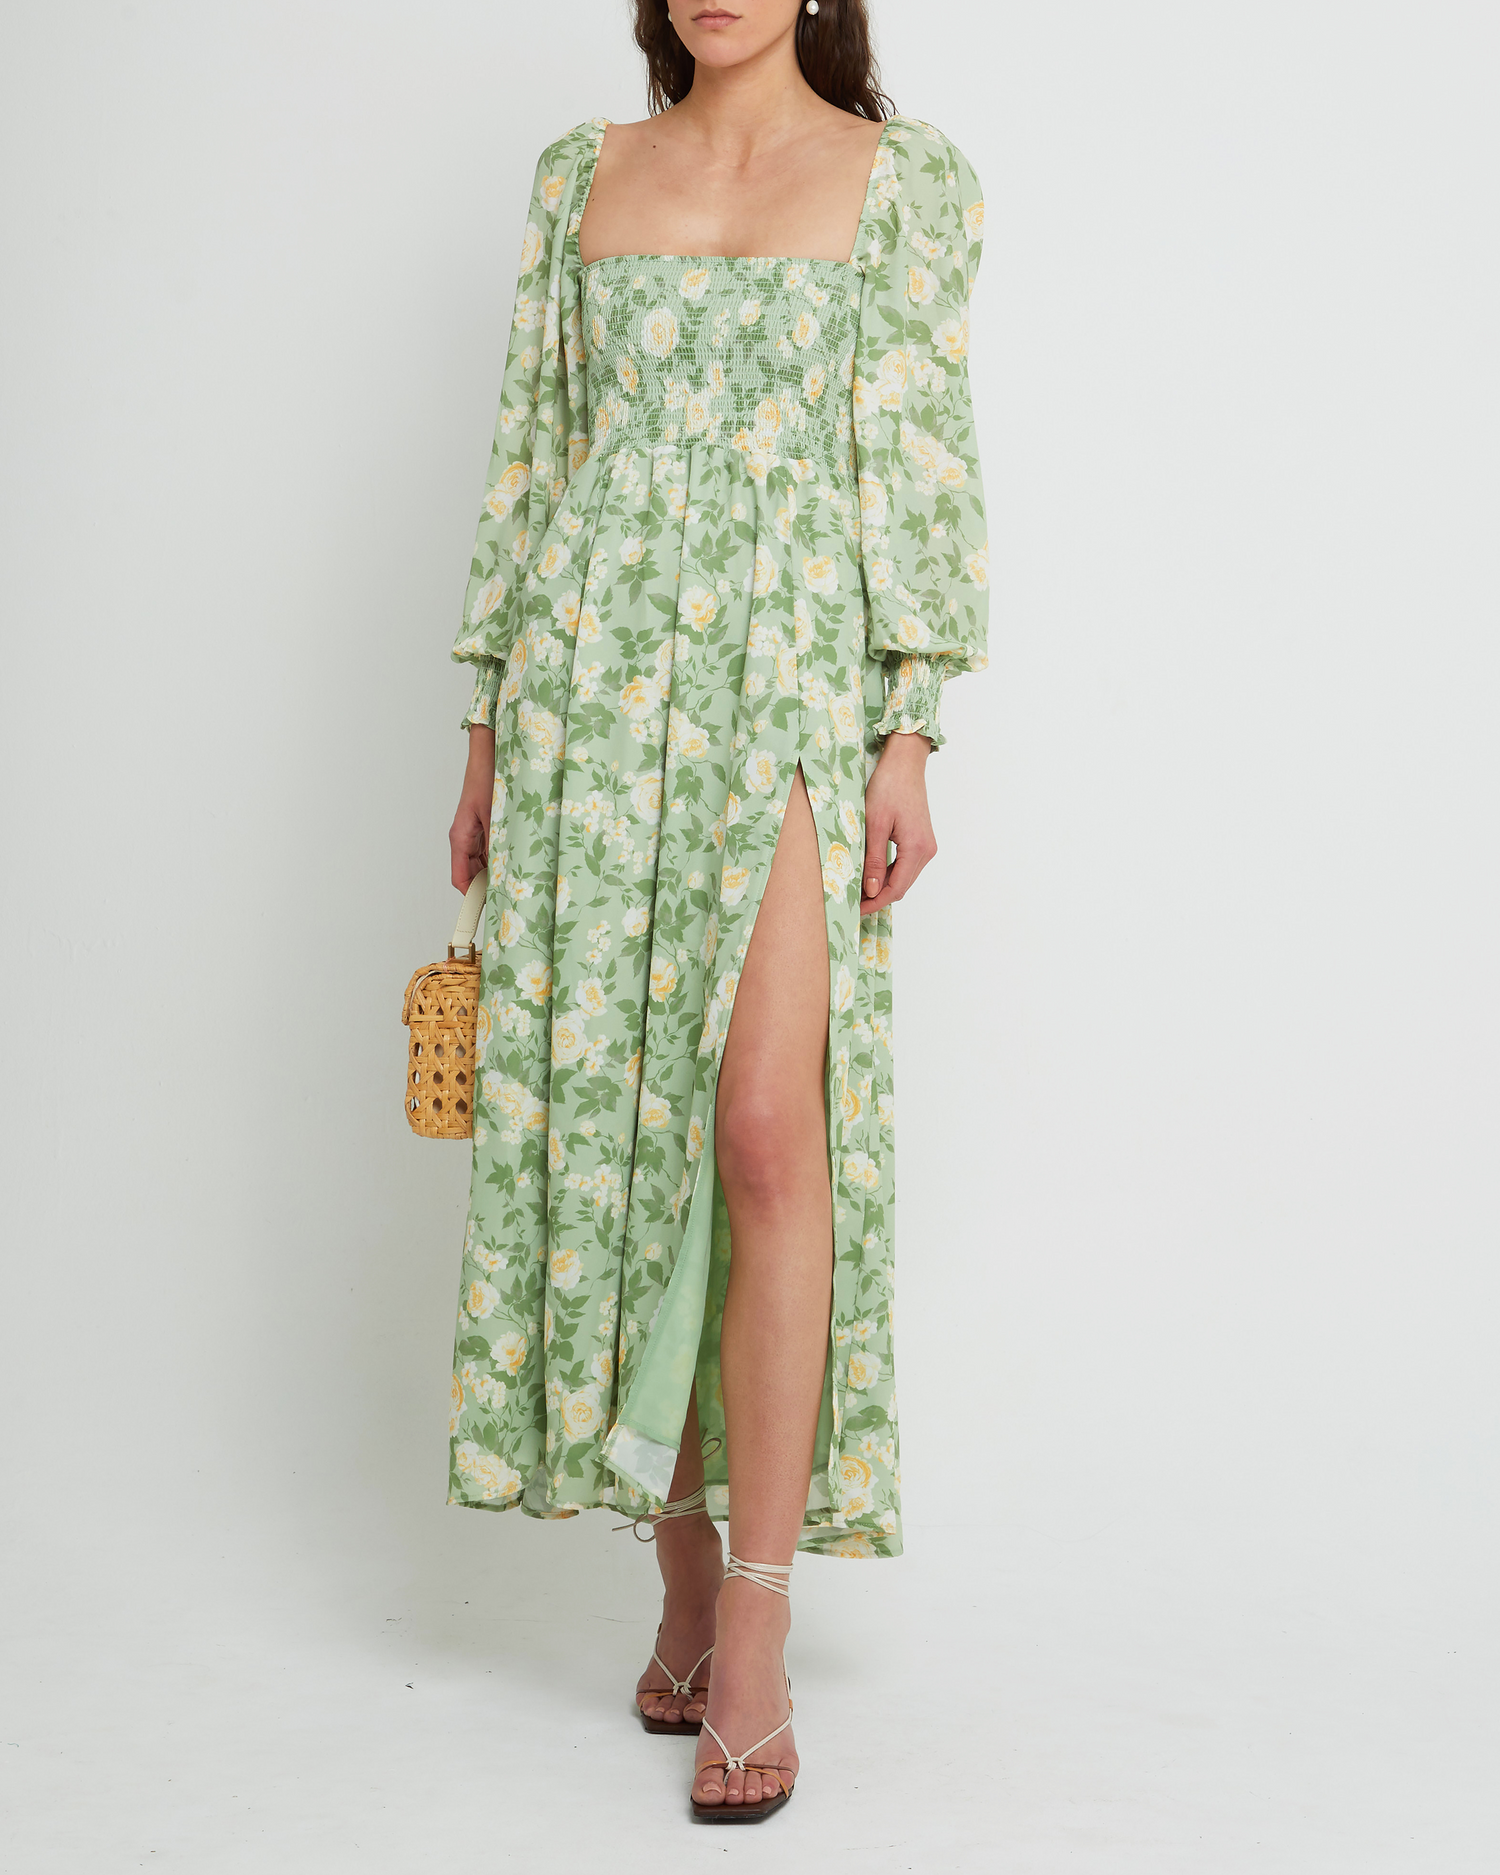 First image of Classic Smocked Maxi Dress, a floral maxi dress, side slit, long, sheer sleeves, puff sleeves, square neckline, smocked bodice